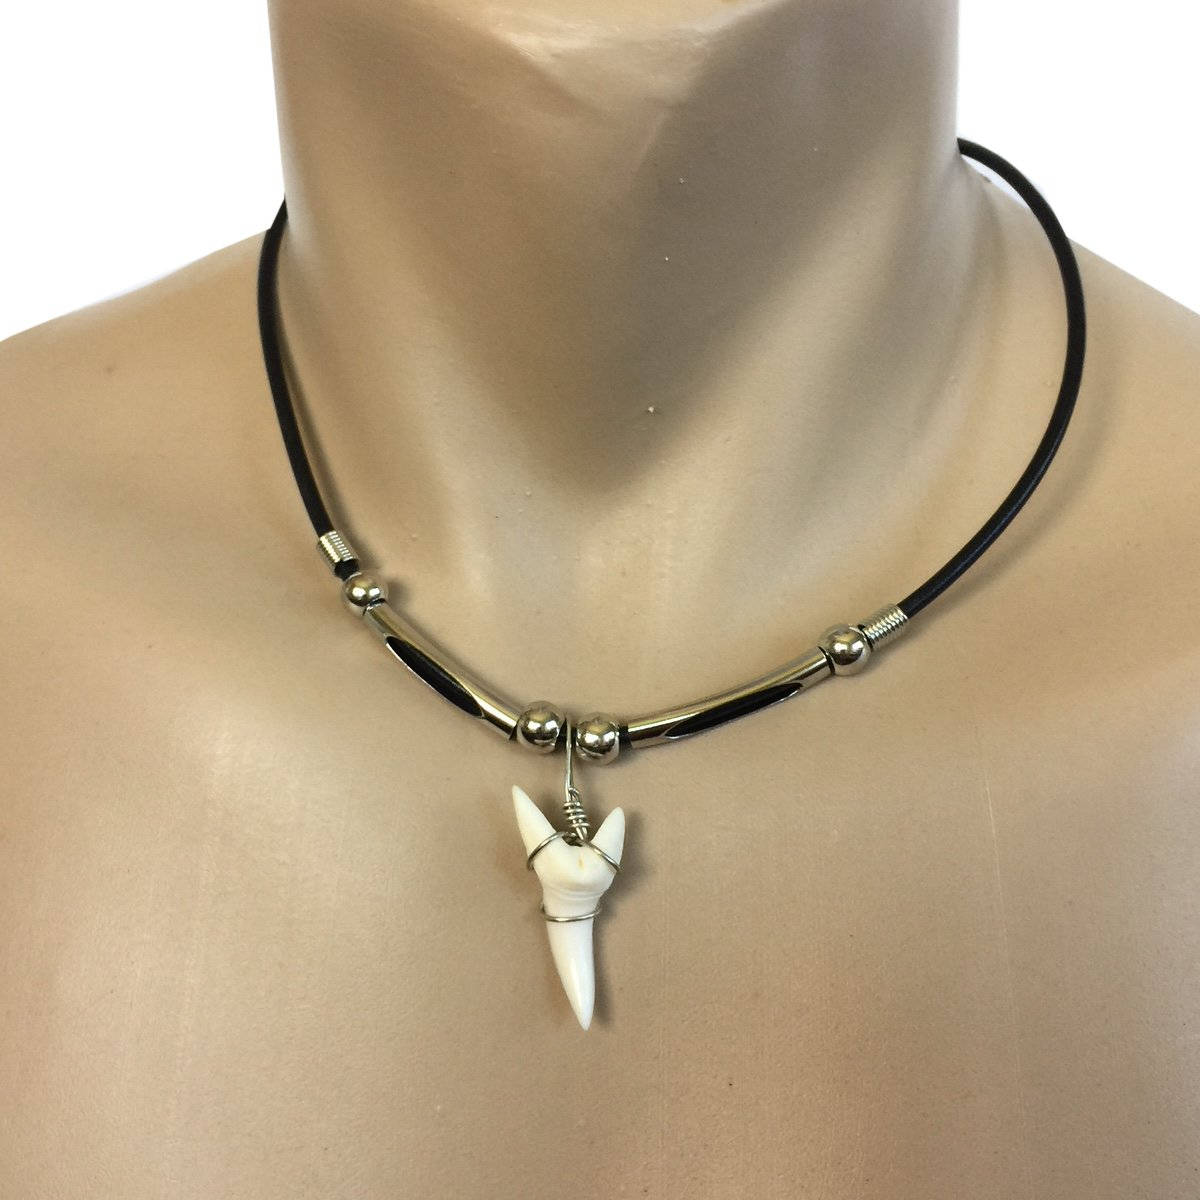 Hawaii surf board pendant shark tooth necklace genuine natural gift men collect 